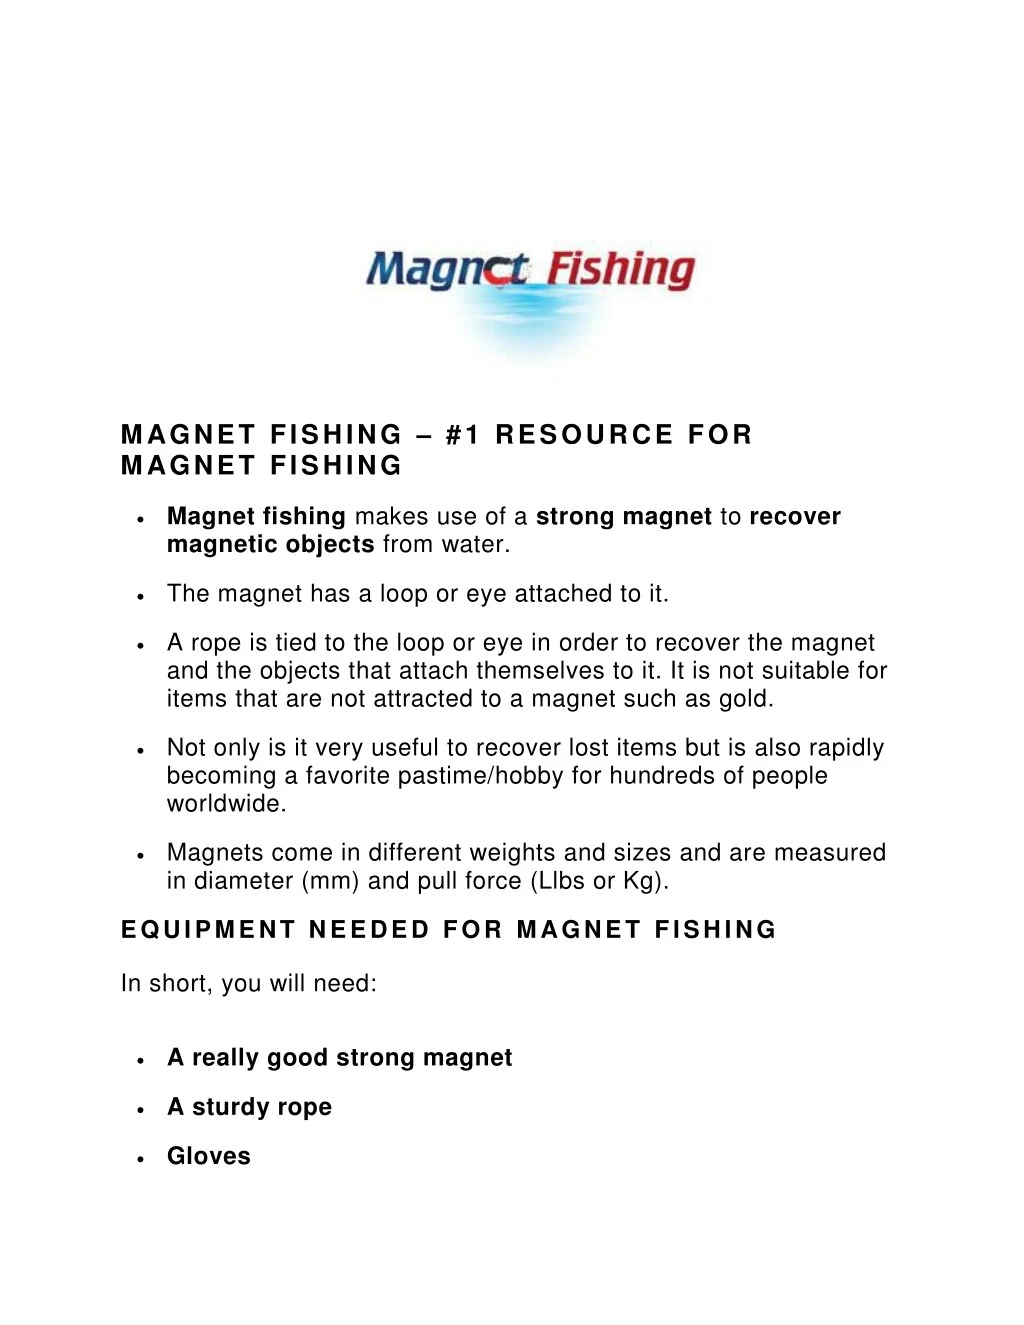 magnet fishing 1 resource for magnet fishing